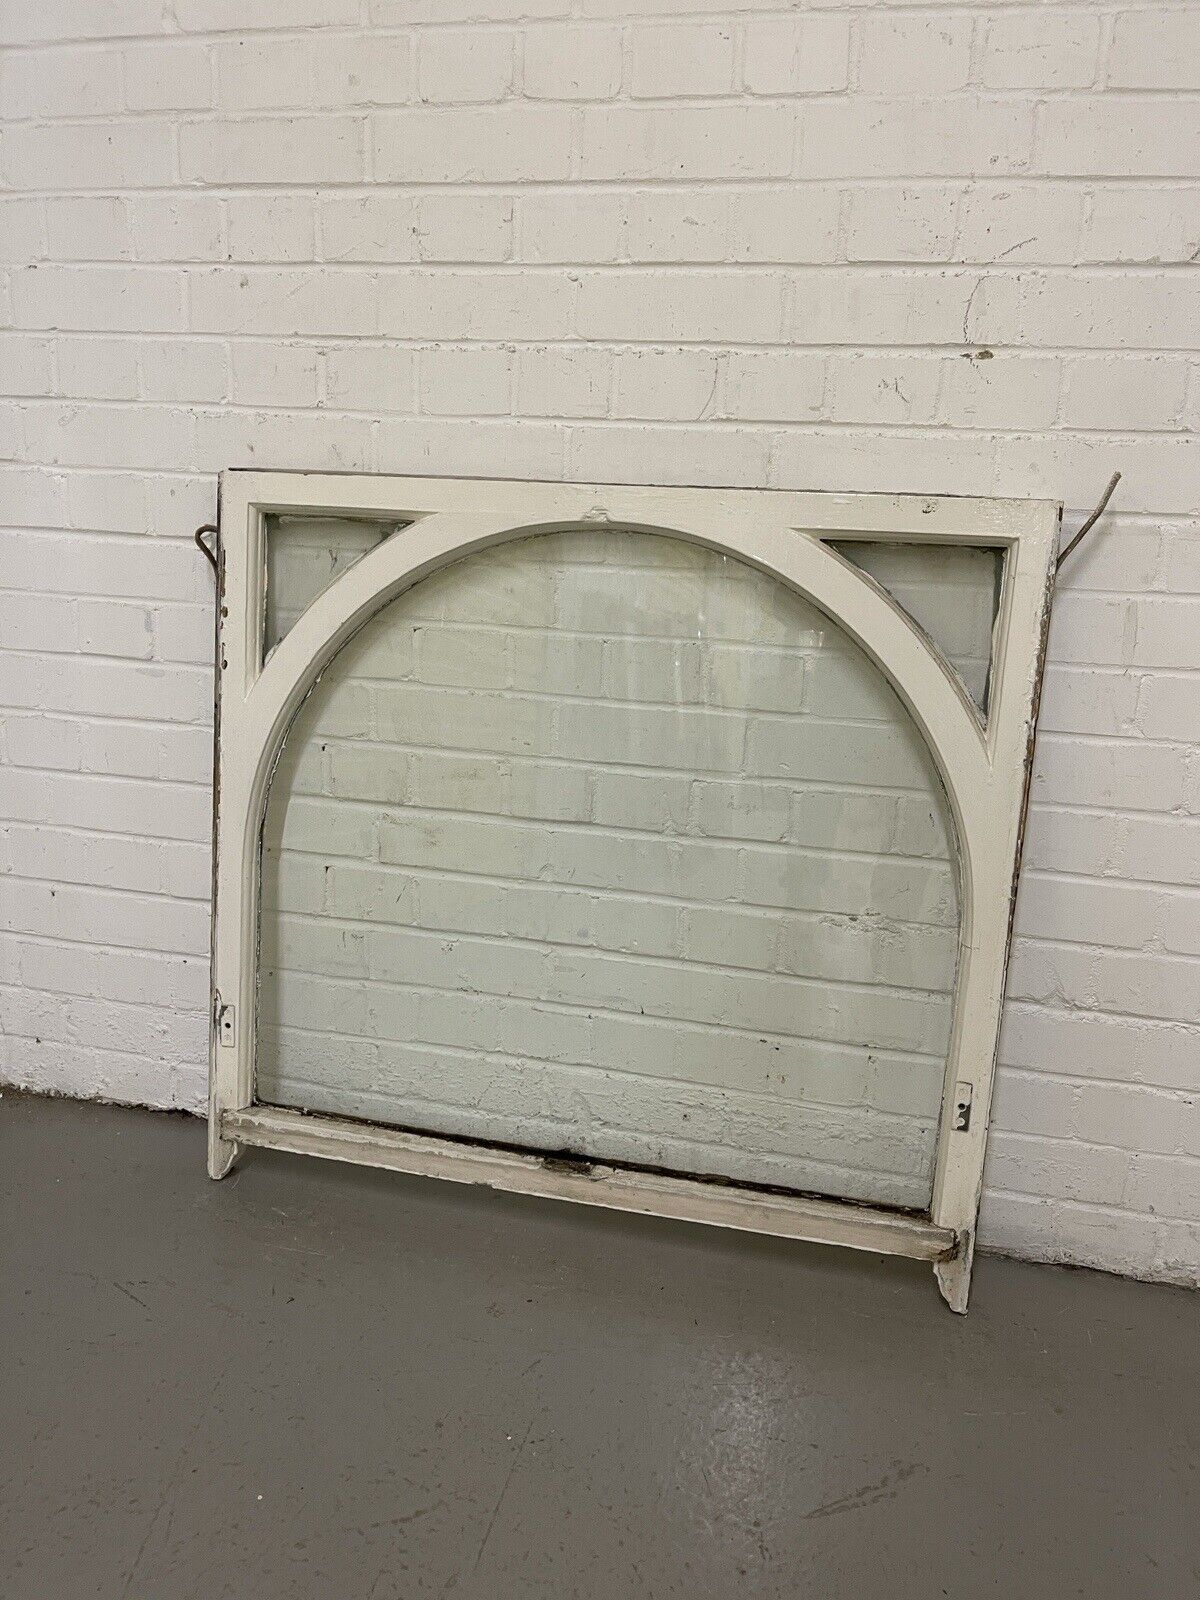 Reclaimed Old Edwardian Arch Wooden Sash Window 913 x 860mm